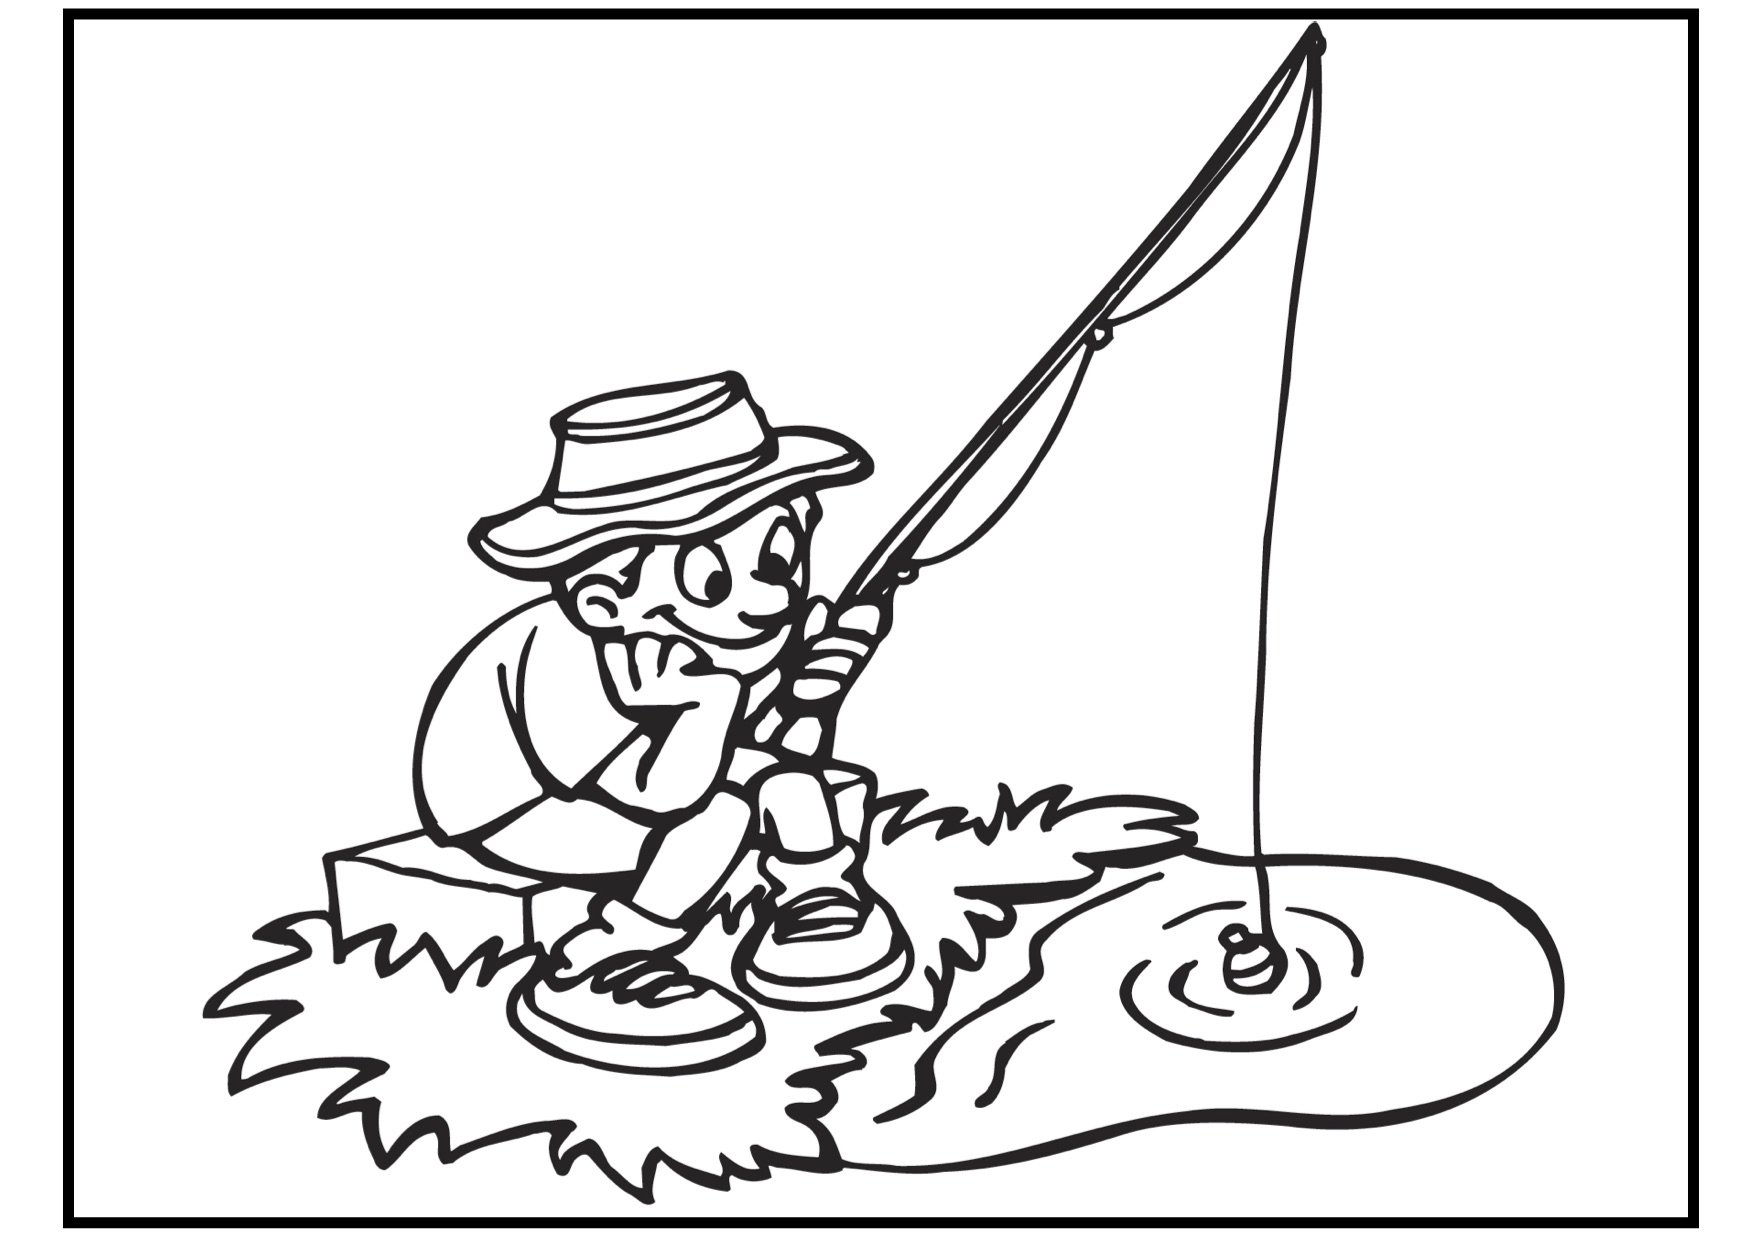 Patient Fisherman Coloring Page - Free Printable Coloring Pages for Kids